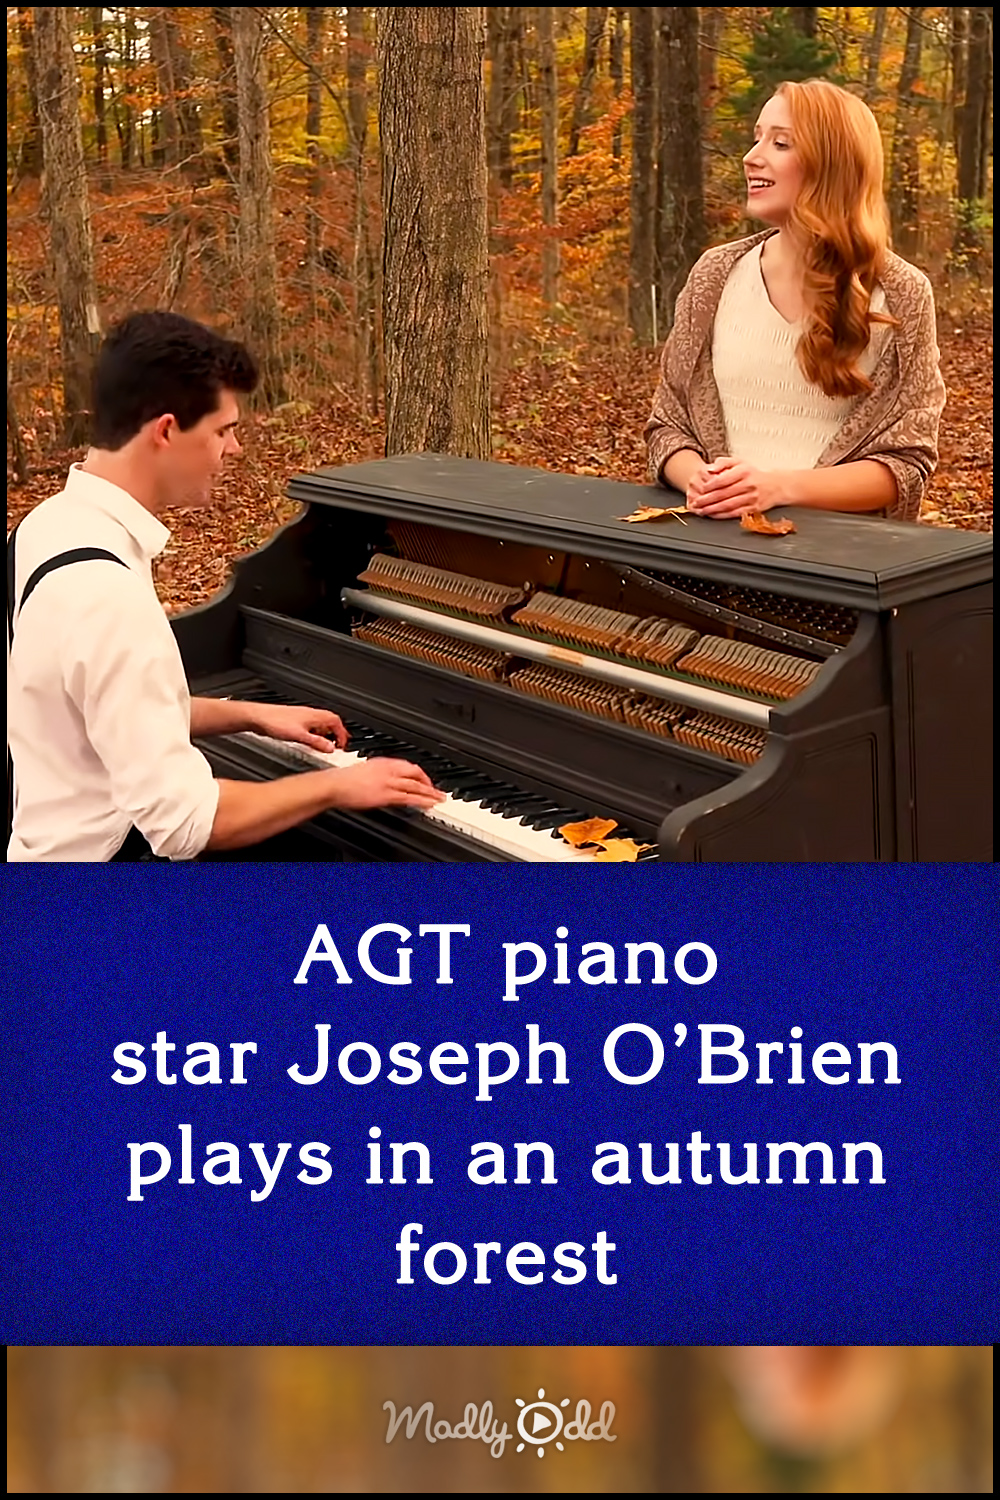 AGT piano star Joseph O’Brien plays in an autumn forest